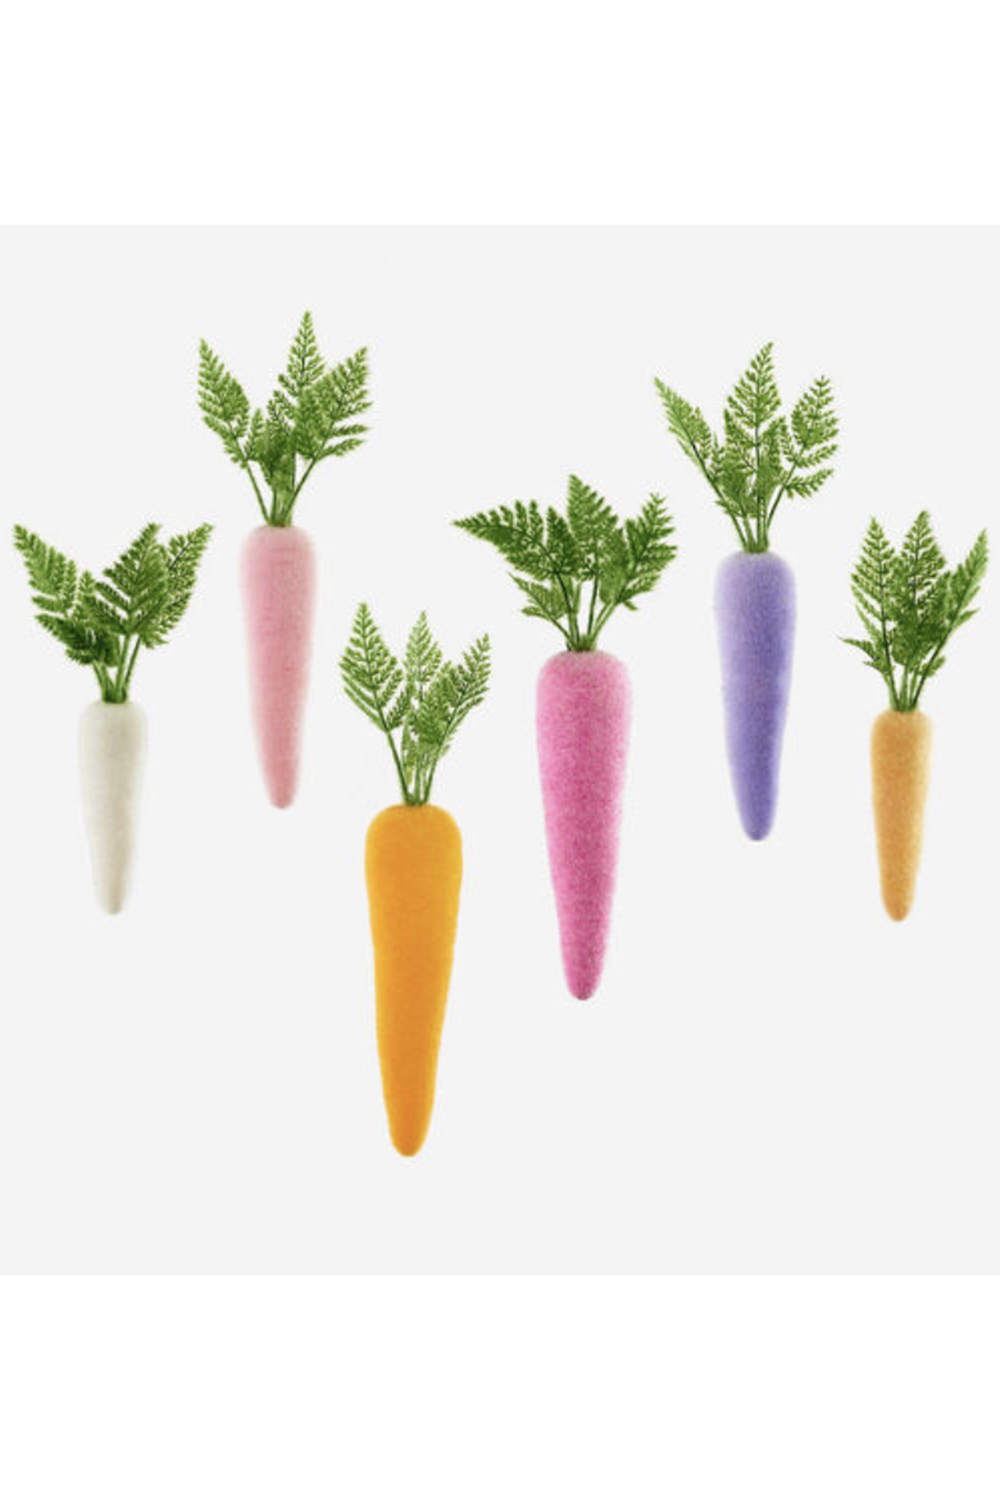 Flocked Carrot - Colorful